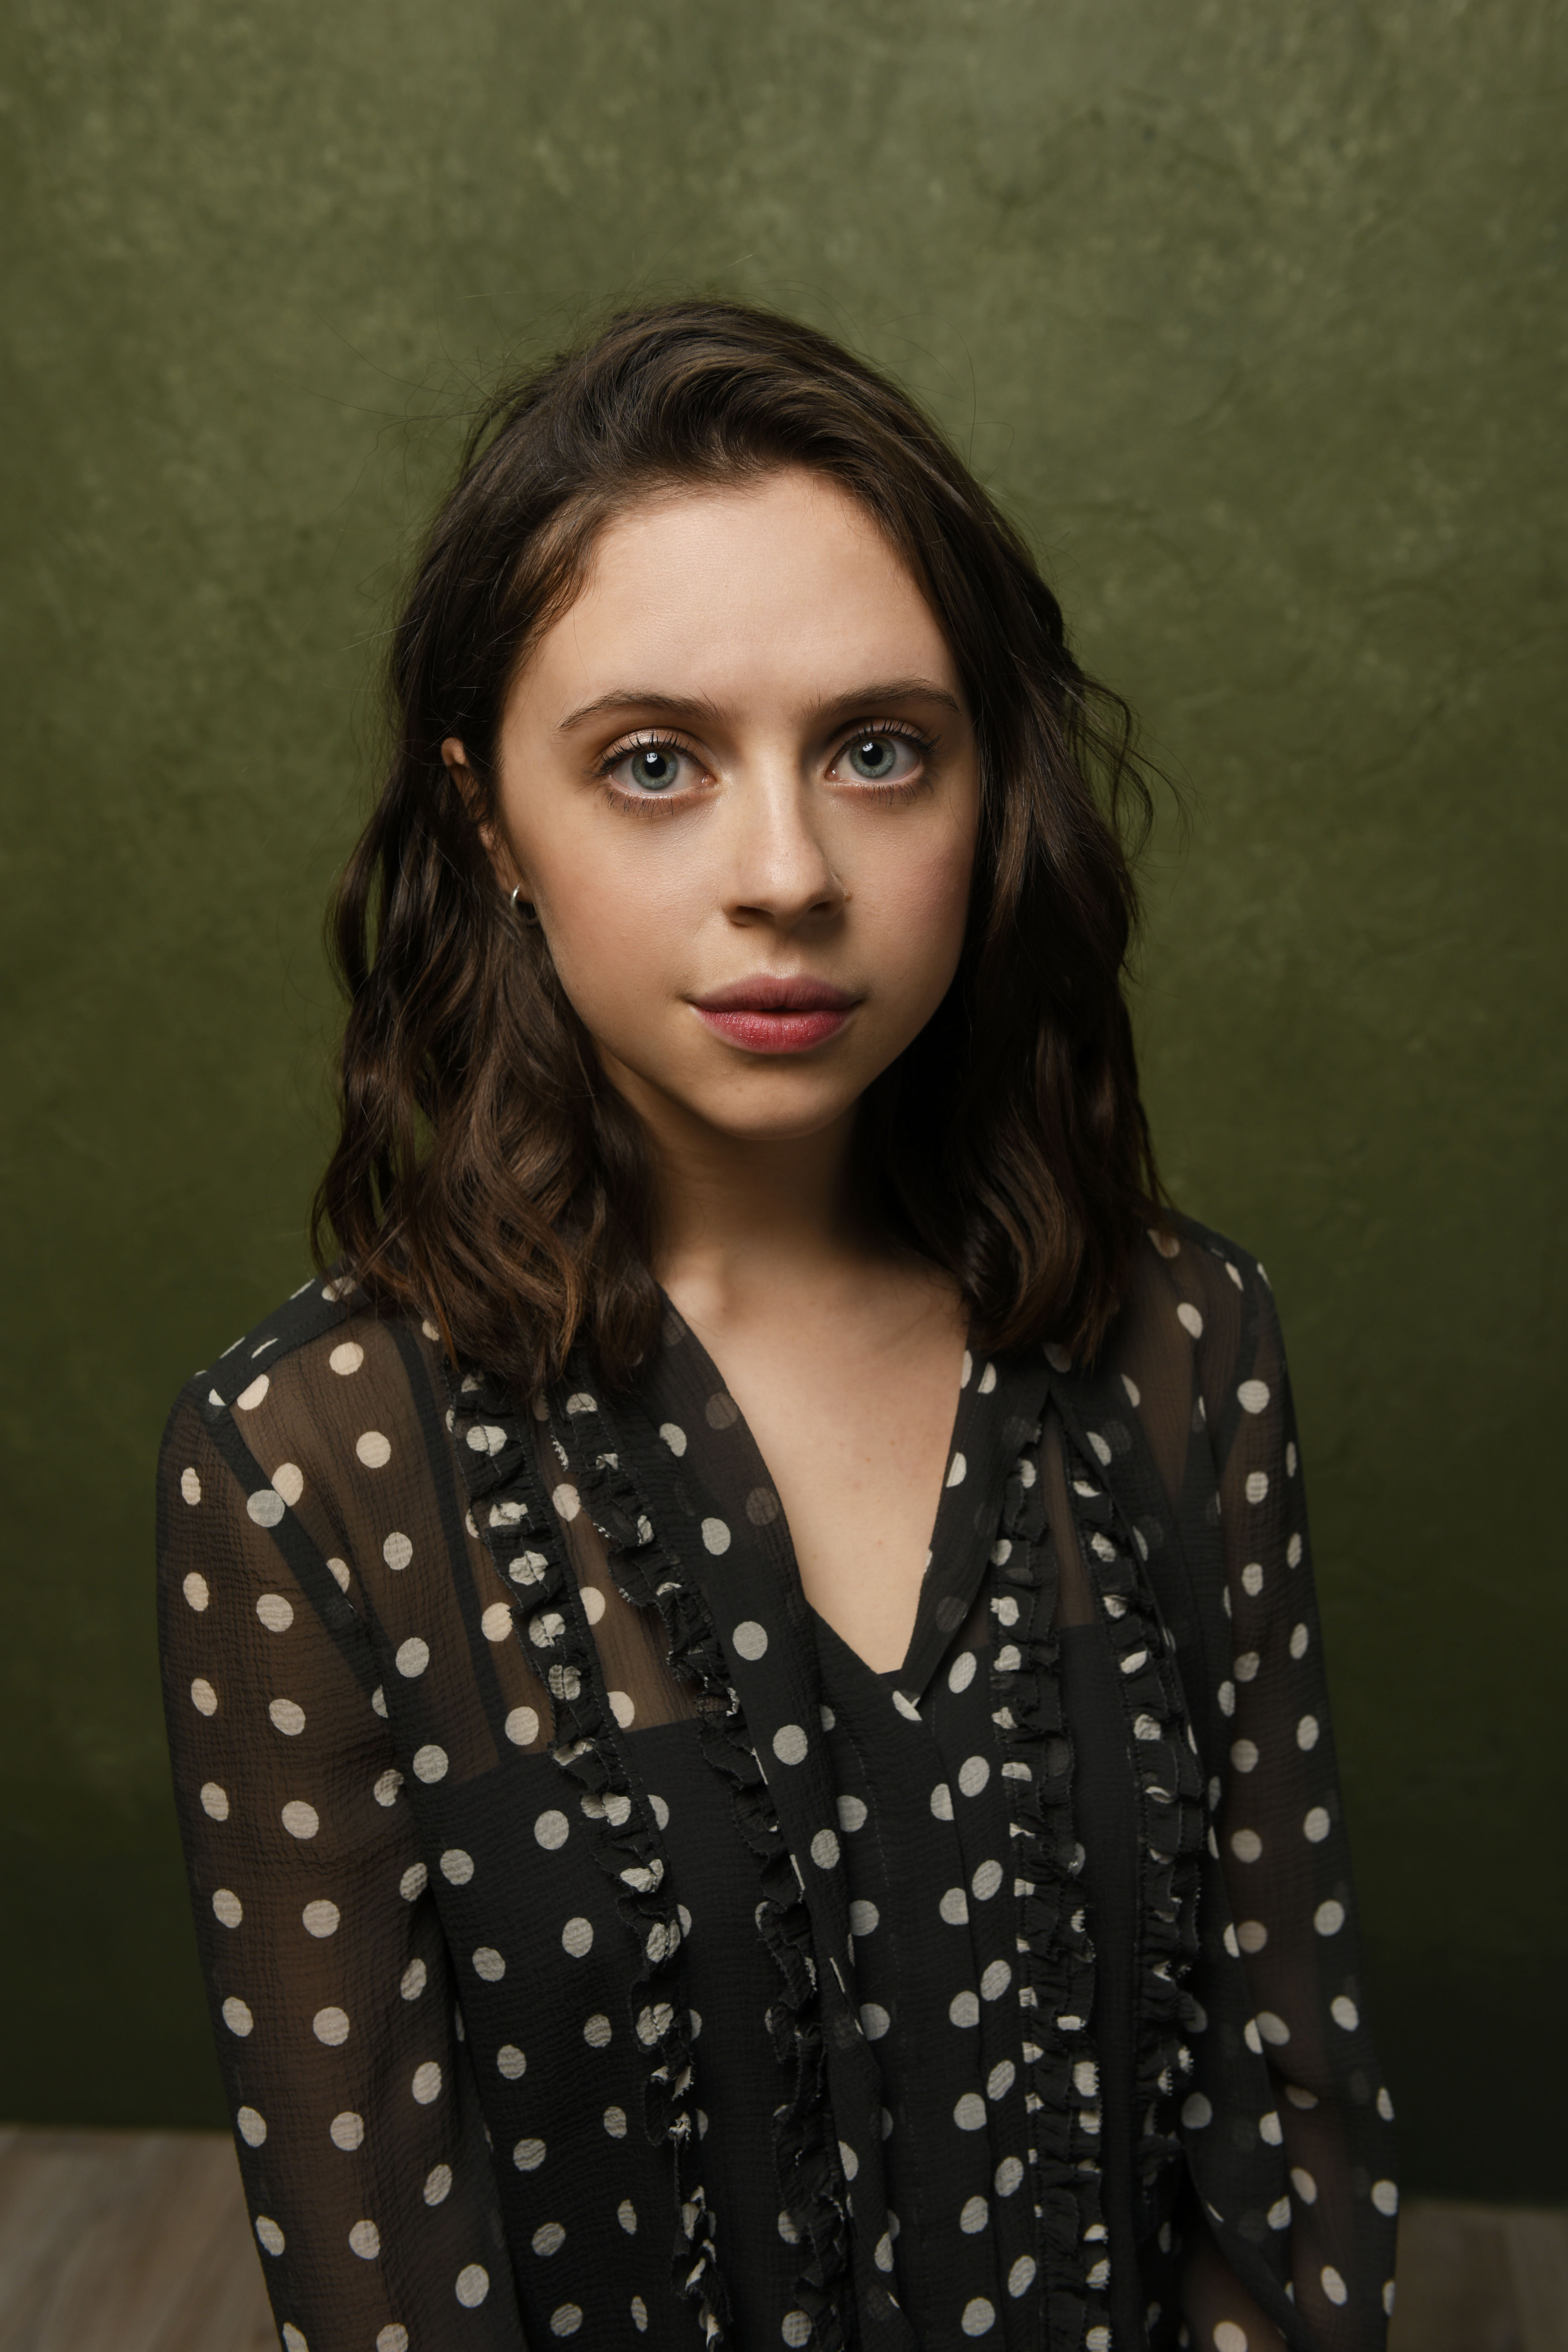 Bel Powley poses for a portrait during the Sundance Film Festival on January 23, 2015 in Park City, Utah. (Larry Busacca--Getty Images)